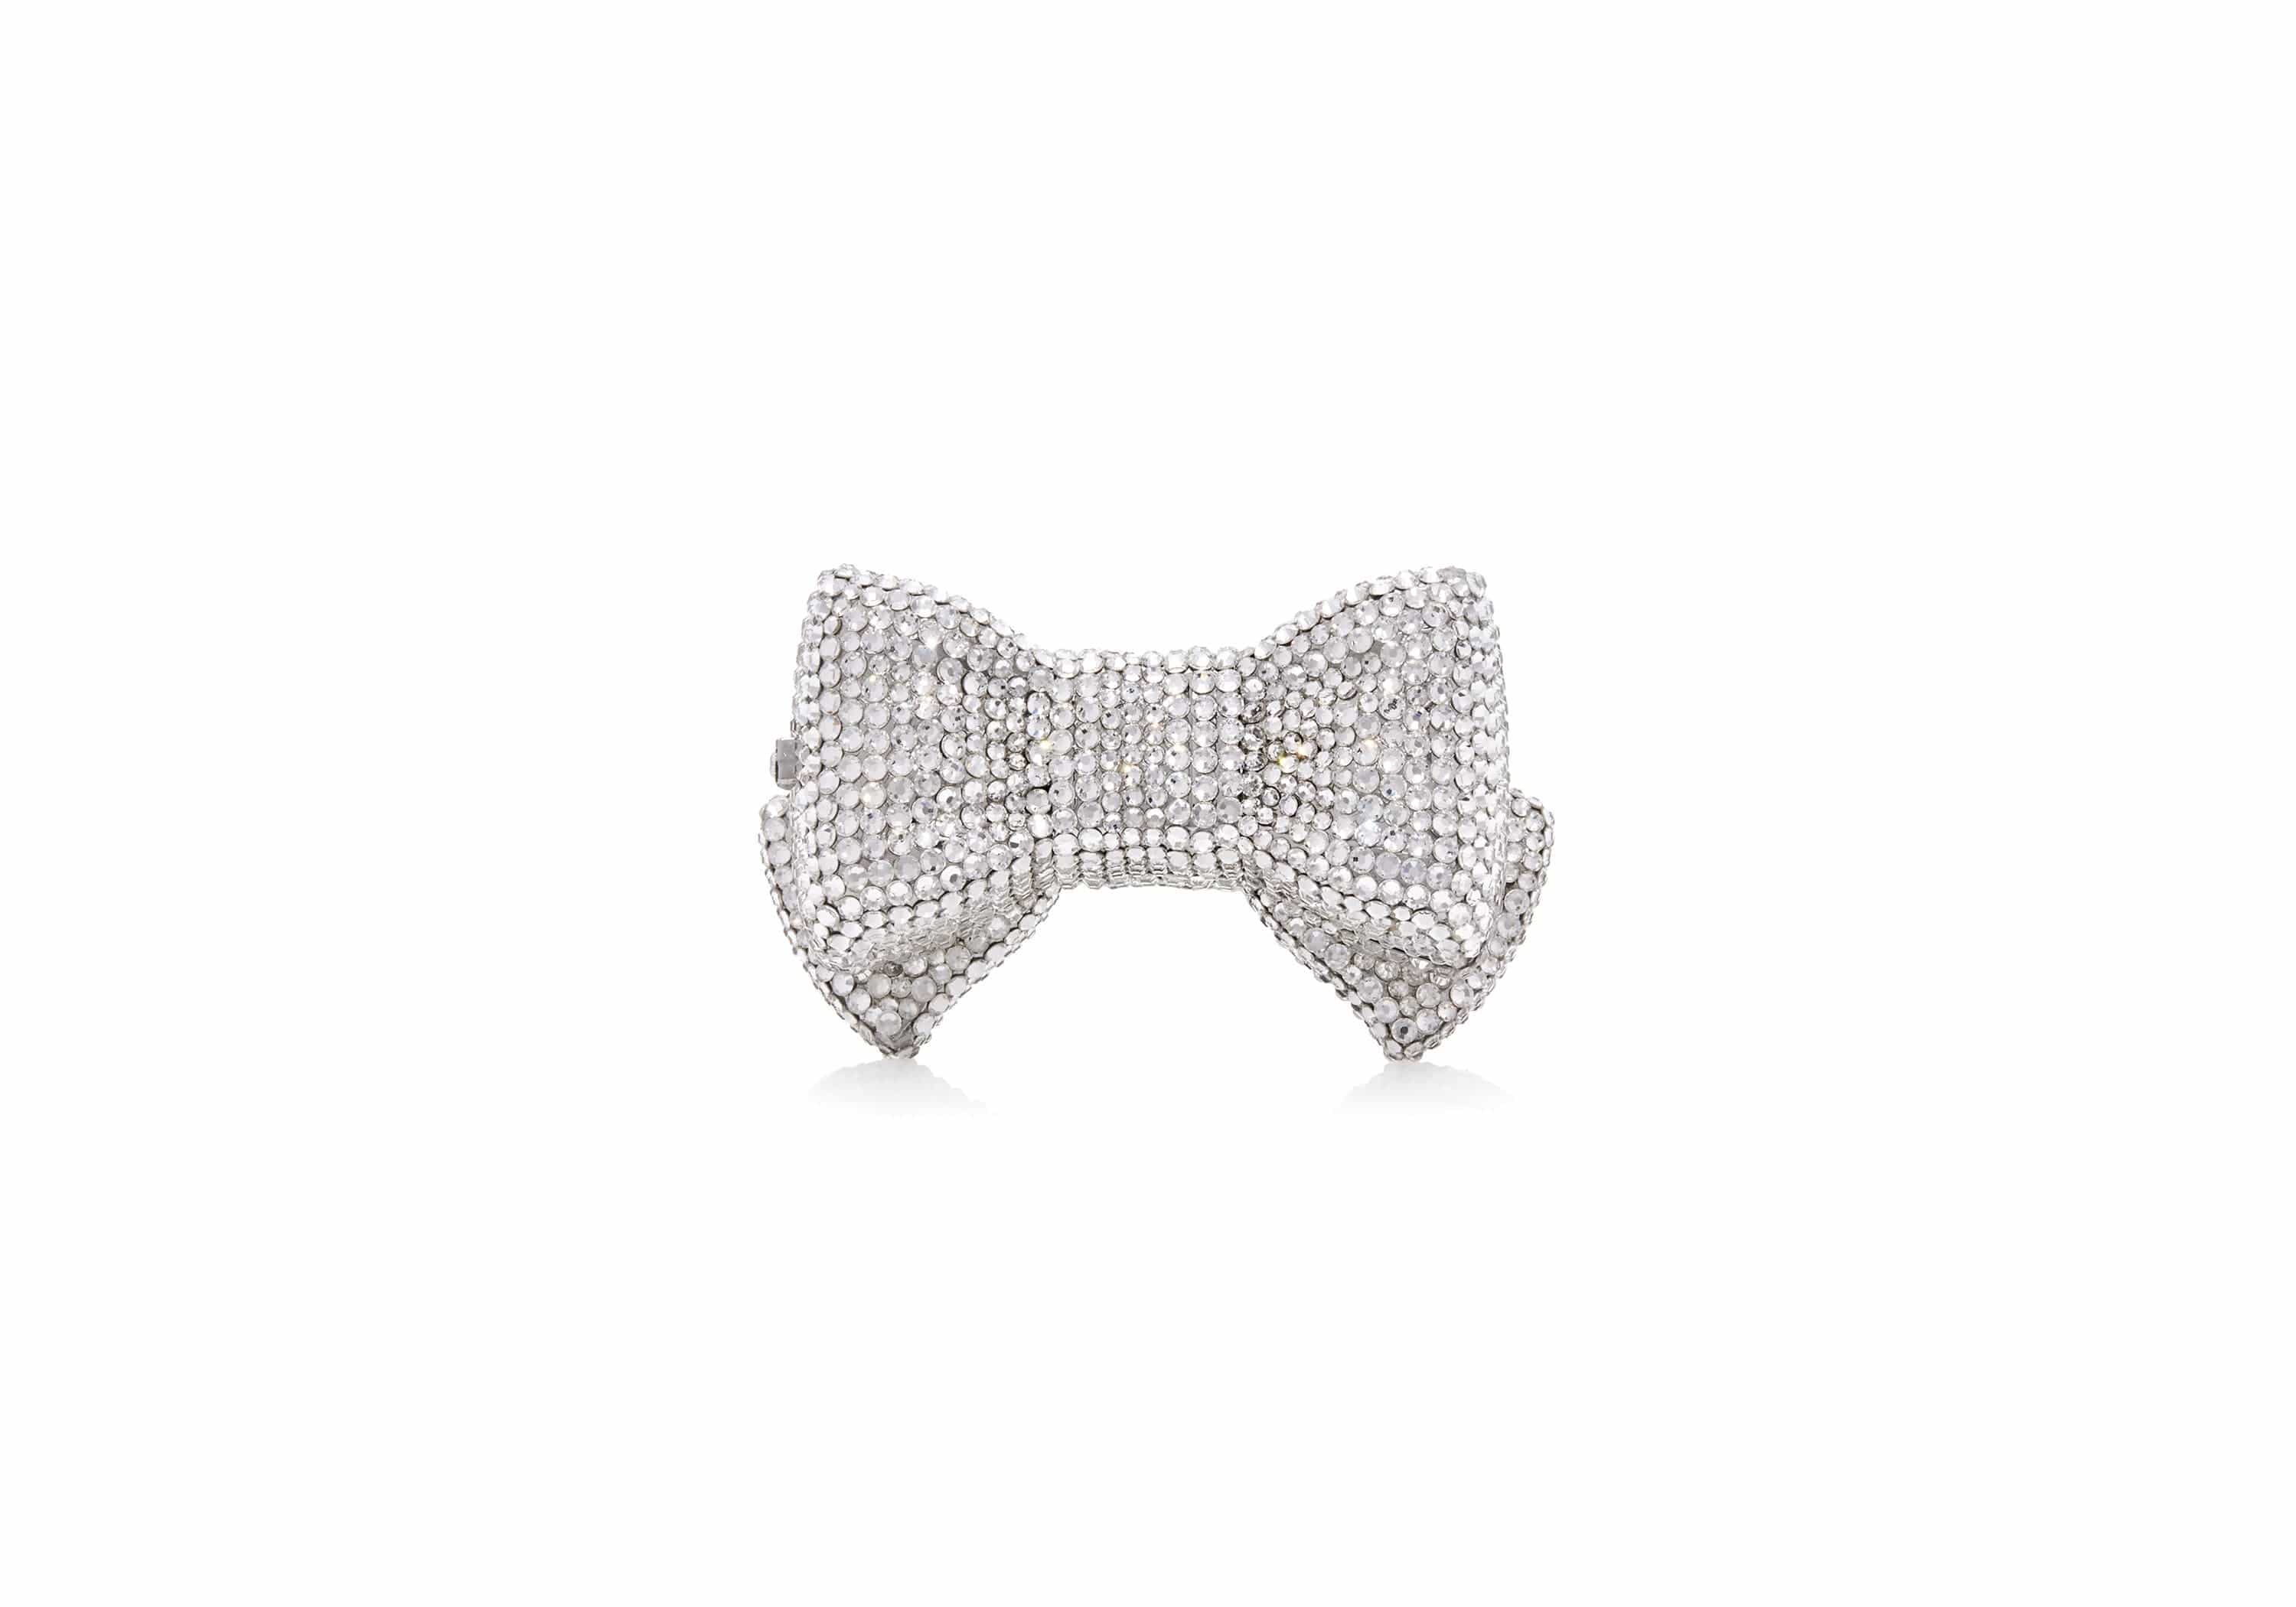 Judith Leiber Couture Women's Bow Crystal Pillbox